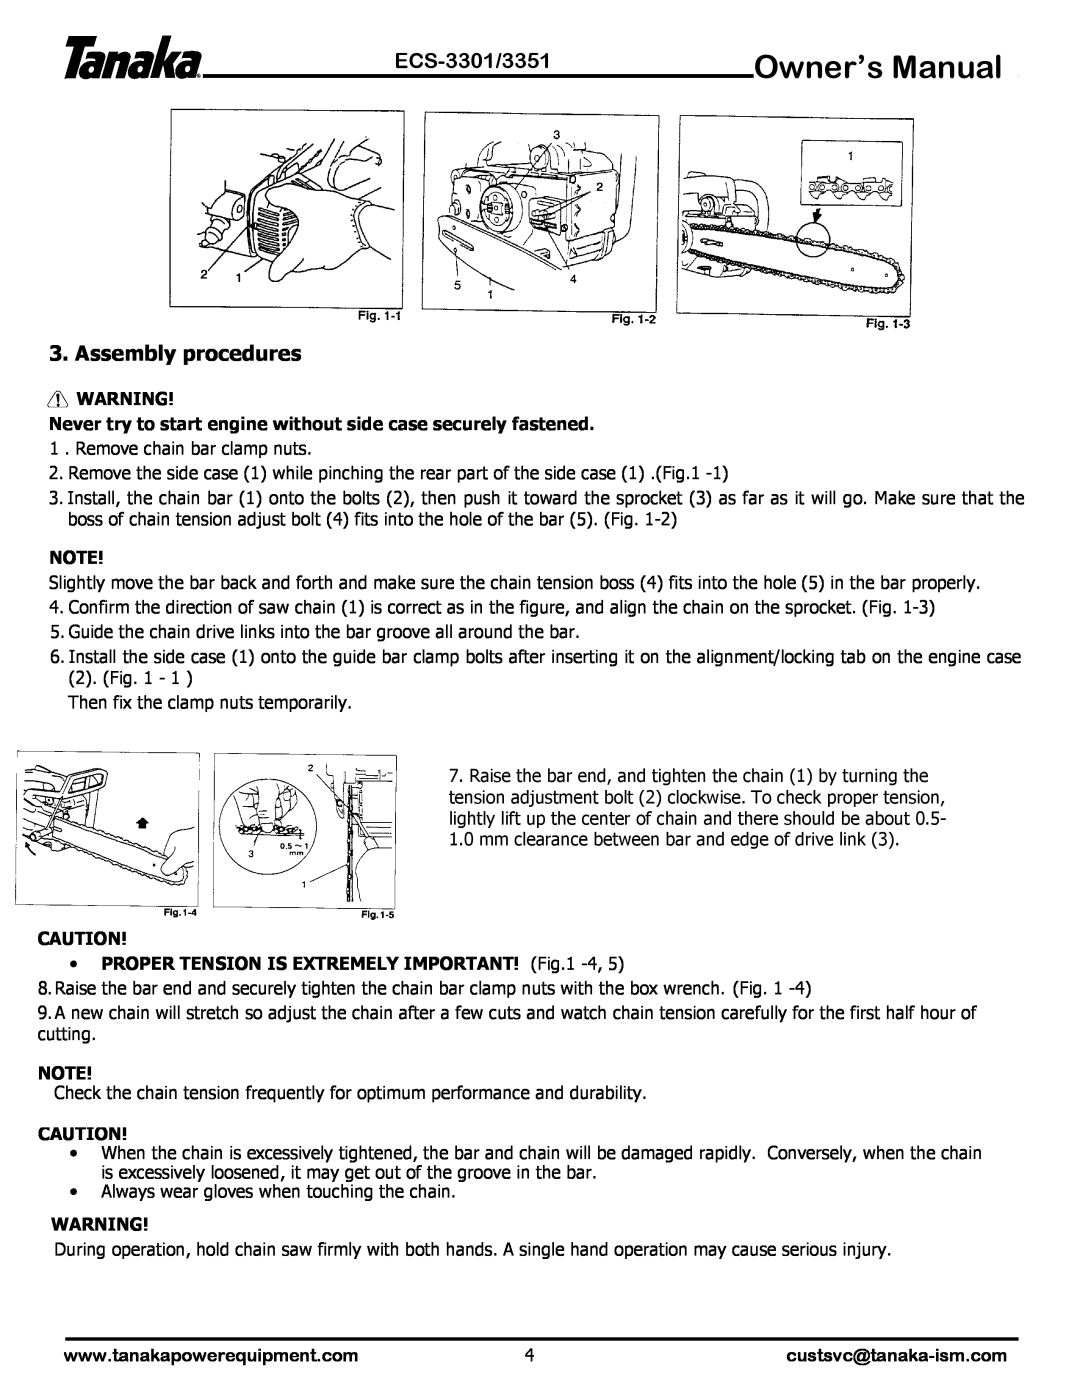 Tanaka ECS-3351 manual Assembly procedures, ECS-3301/3351, Never try to start engine without side case securely fastened 